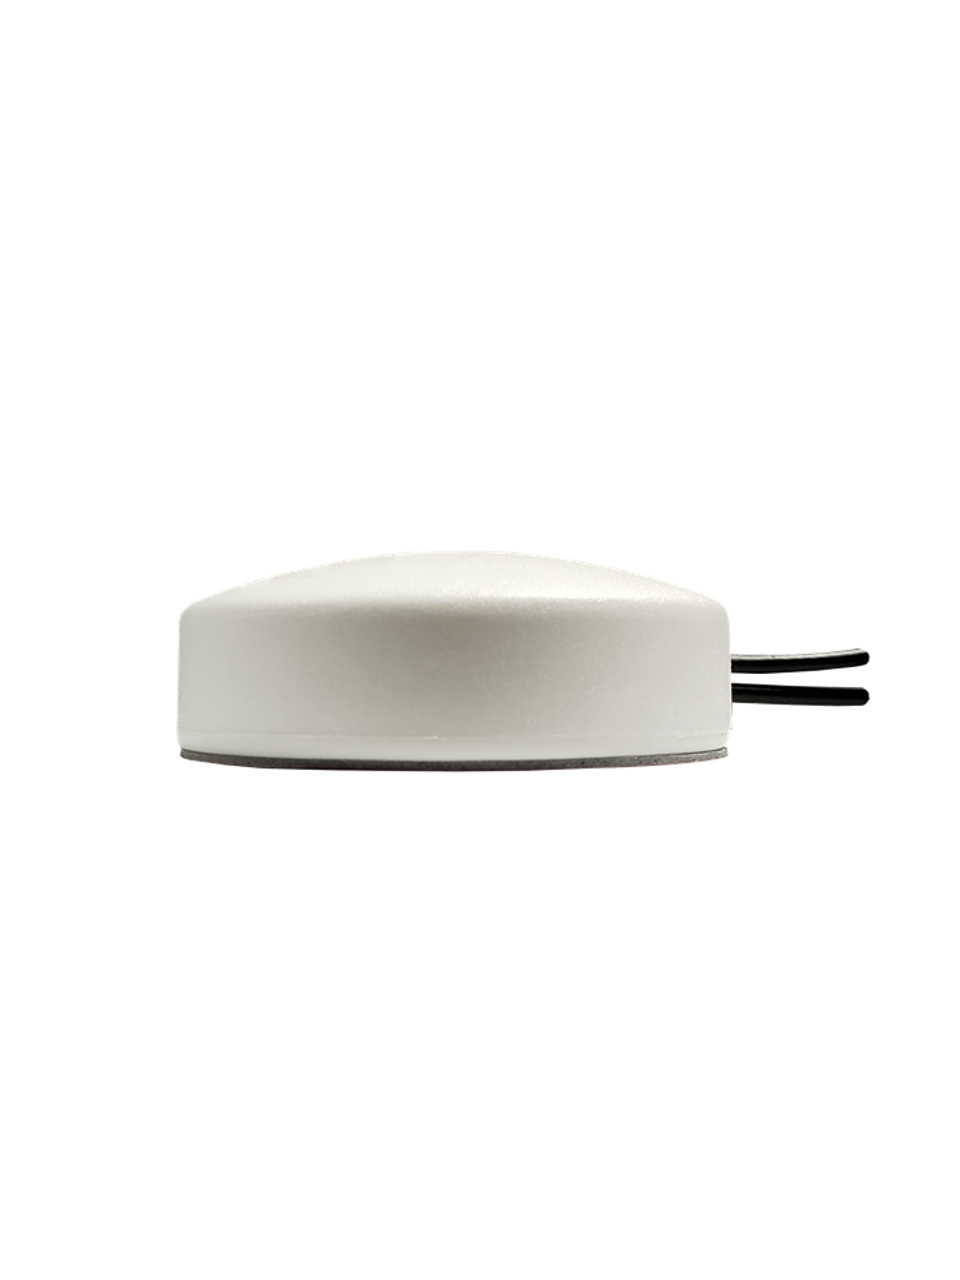 M400 2-Lead MIMO Cellular 3G 4G 5G LTE Adhesive Mount M2M IoT Antenna for Inseego Skyus-300V Gateway